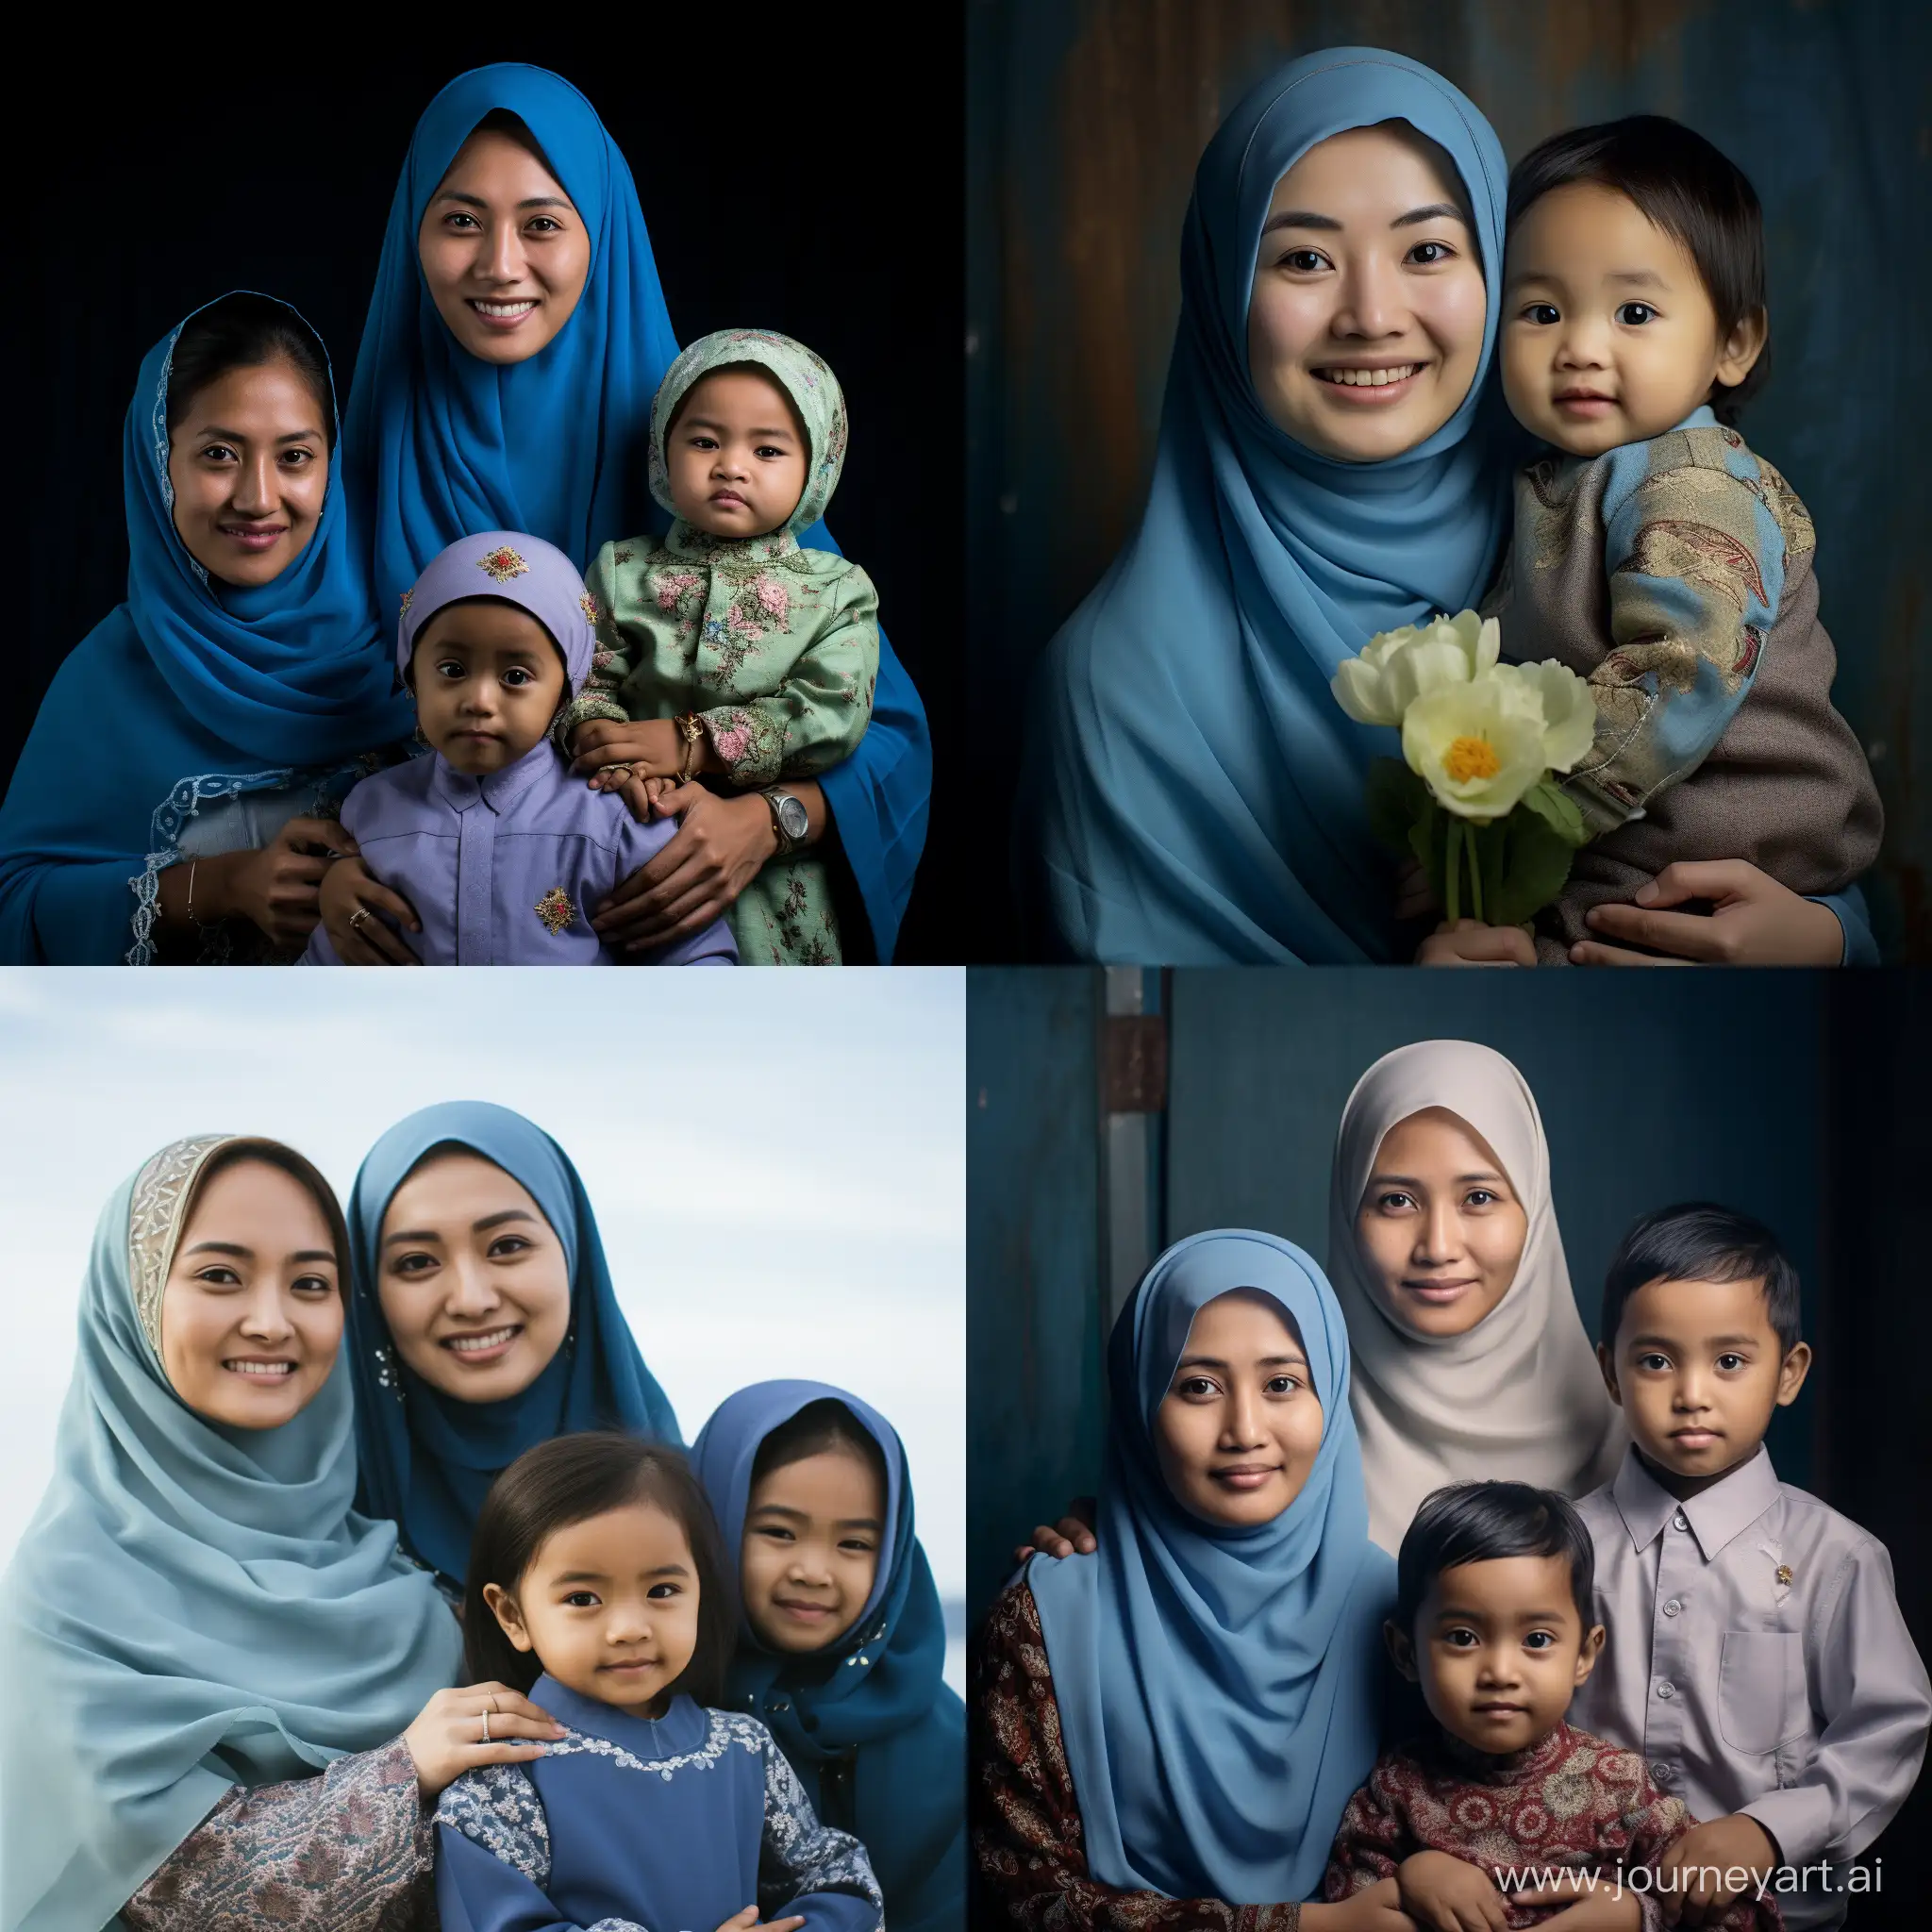 A family portrait of an Indonesian family with a beautiful 30-year-old mother with a round face, wearing a fashionable sky blue hijab combined with a sky blue kebaya, holding her 2-year-old daughter, next to her right there is an 8-year-old girl with long hair tied up, while behind the mother there is a young 30-year-old father with slightly chubby cheeks hugging the mother, short black hair, round face, thick body type, wearing a sky blue batik, dark background